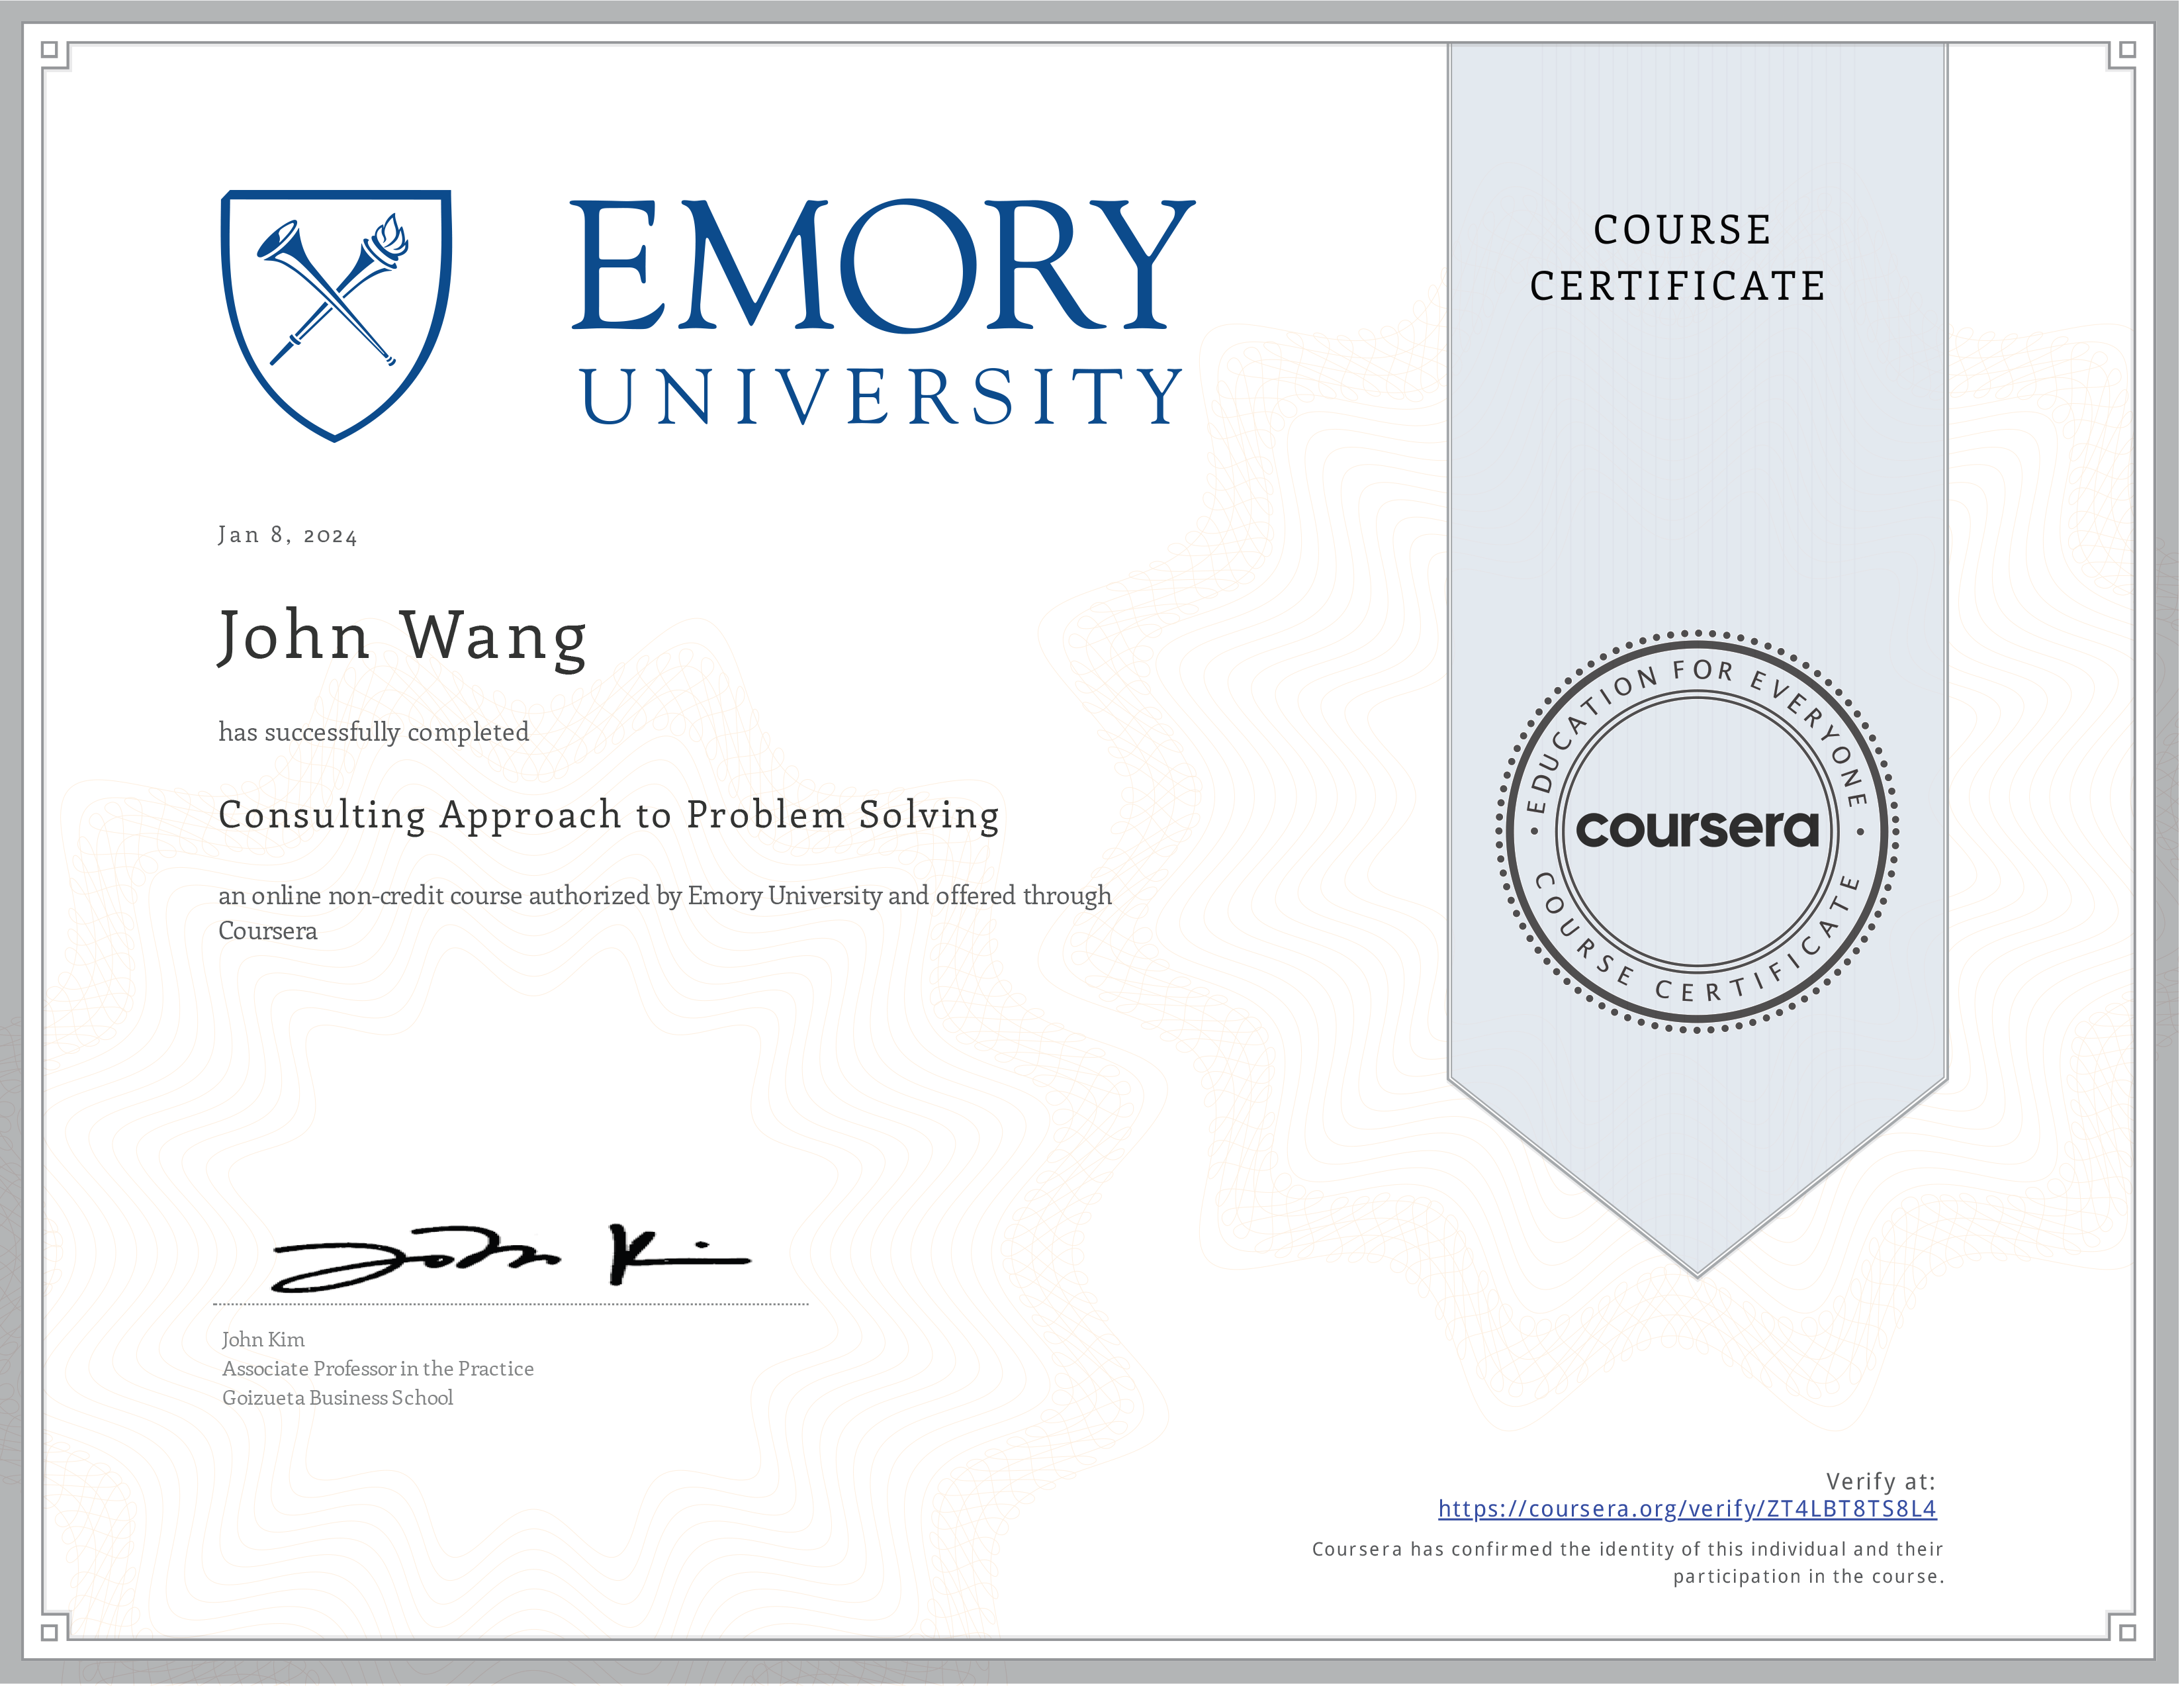 John's Consulting Approach to Problem Solving from Emory University by John Kim